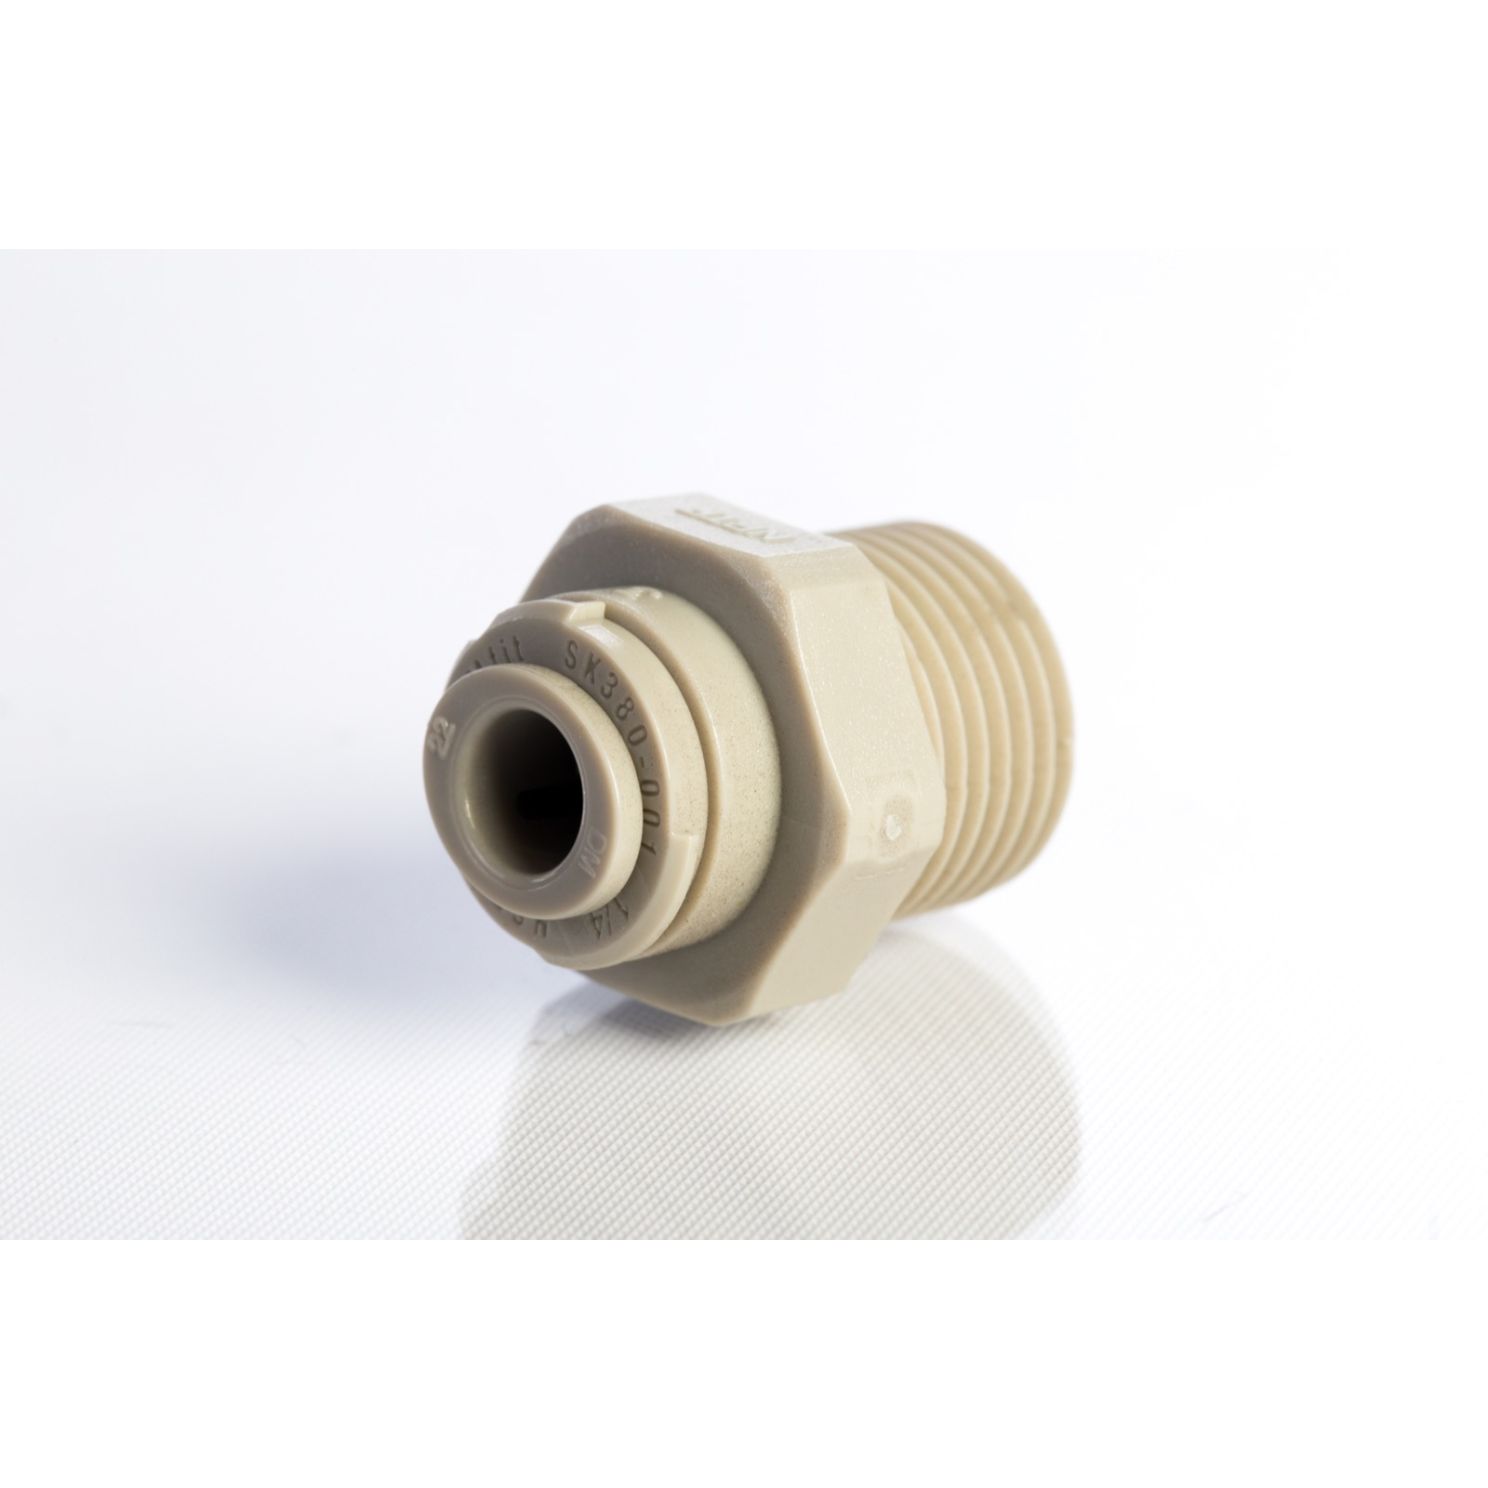 Push Connect Male Connector 1/4" Tube OD to 3/8" NPTM Thread